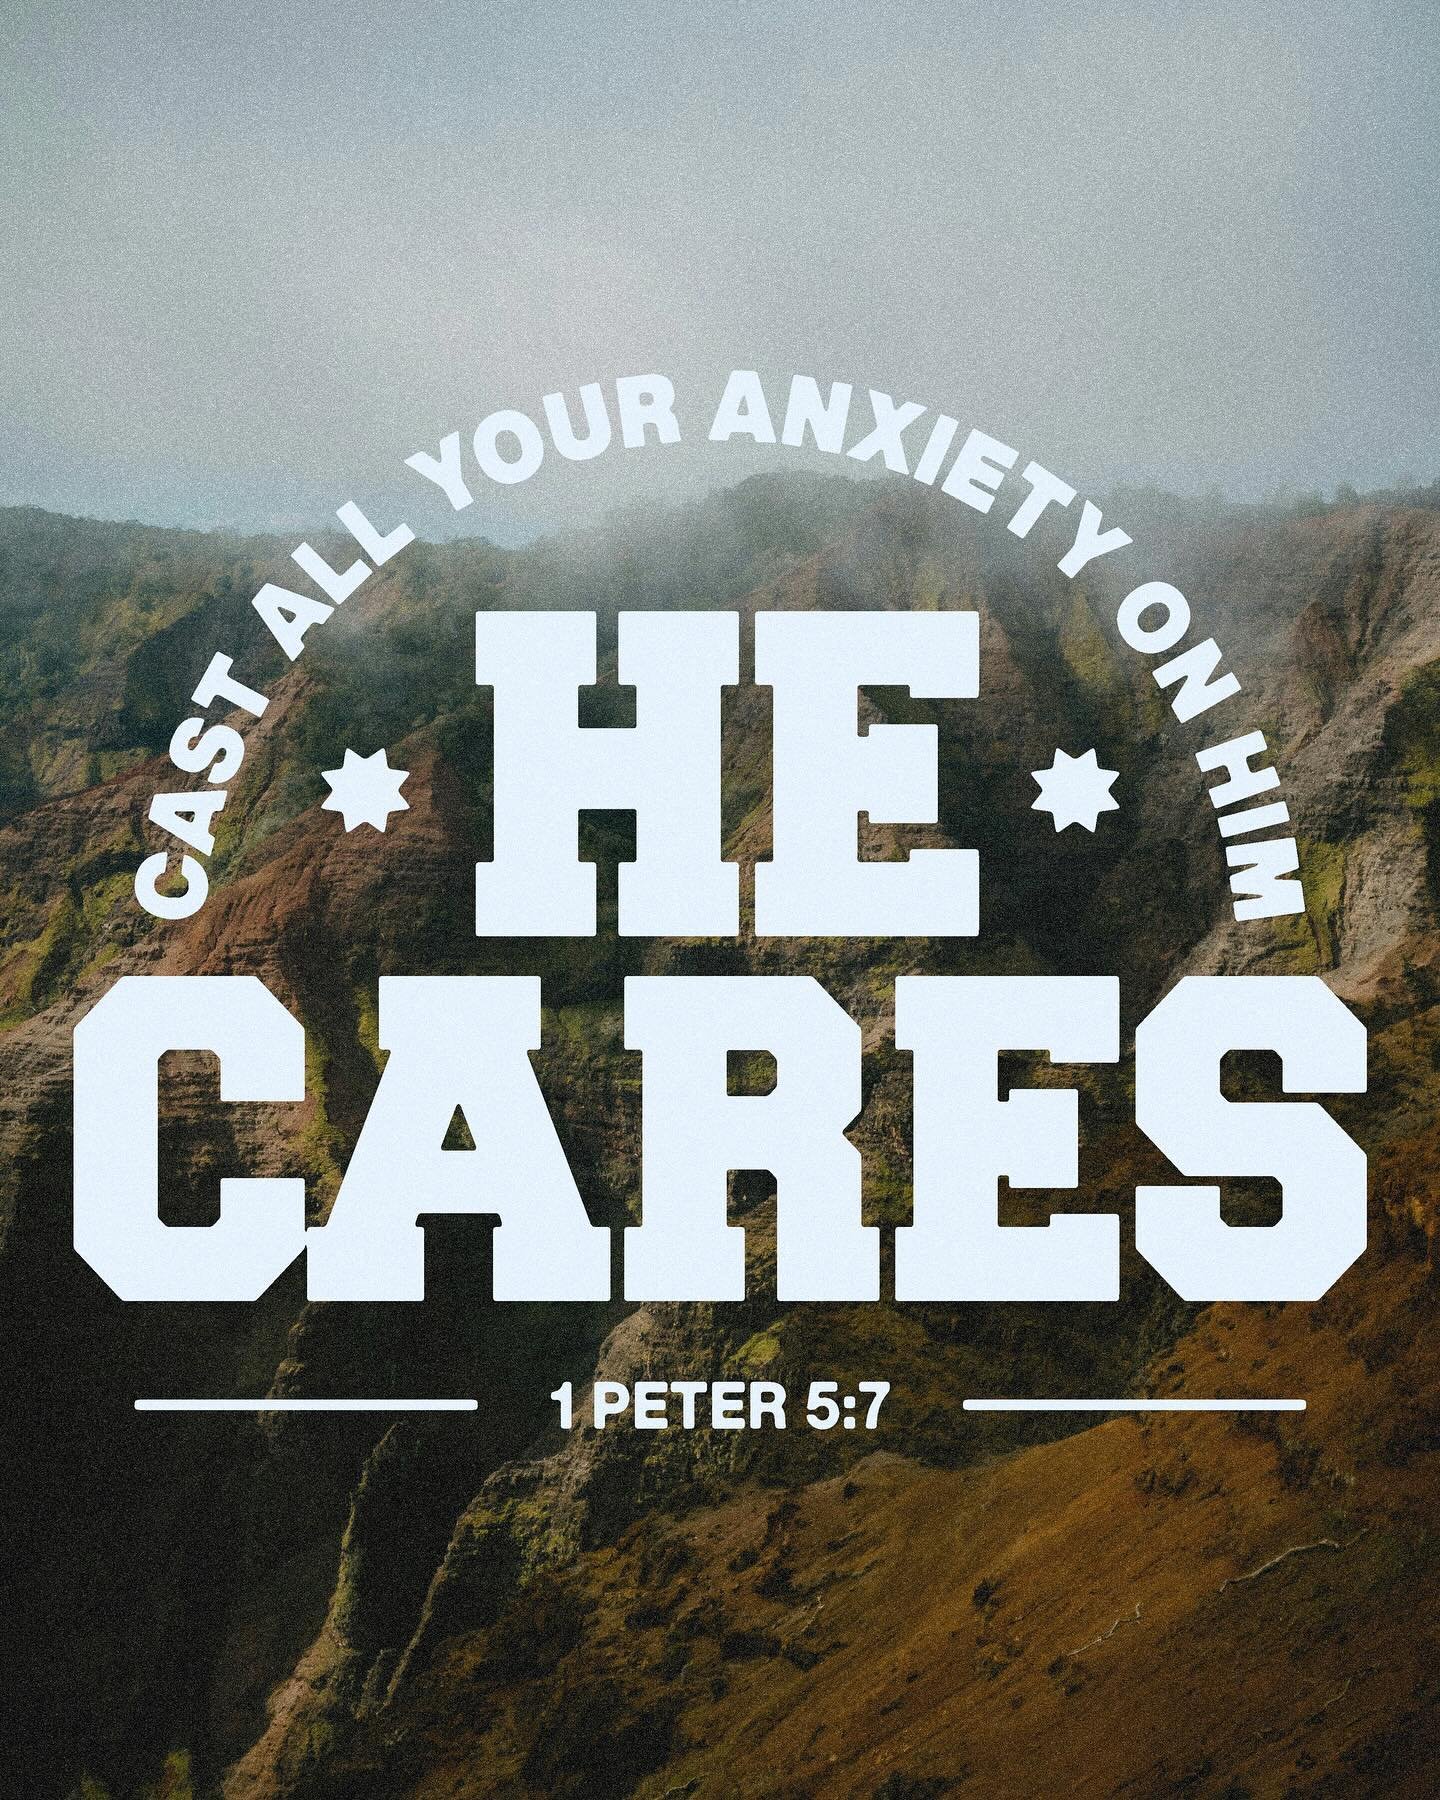 GOD CARES. Whatever you&rsquo;re worried about, talk to Him 🙏
&bull;
Swipe to see alternatives ➡️